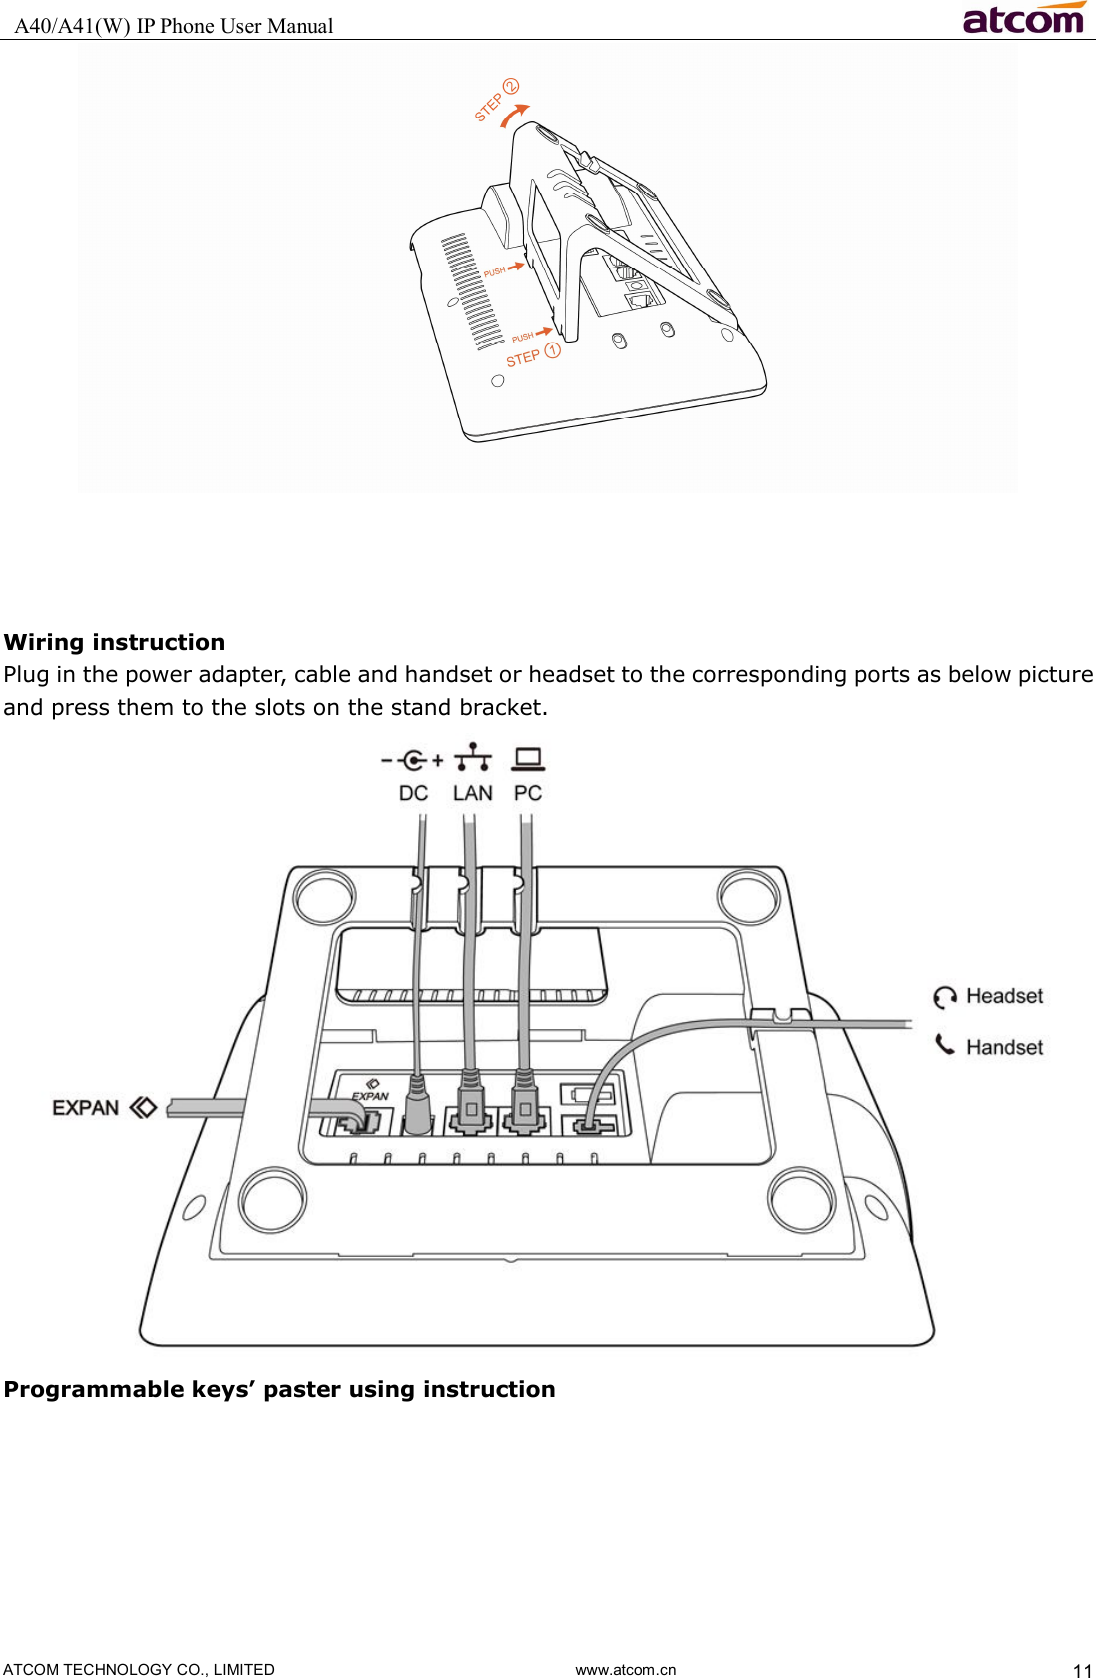   A40/A41(W) IP Phone User Manual                                                                     ATCOM TECHNOLOGY CO., LIMITED                              www.atcom.cn  11      Wiring instruction Plug in the power adapter, cable and handset or headset to the corresponding ports as below picture and press them to the slots on the stand bracket.  Programmable keys’ paster using instruction 